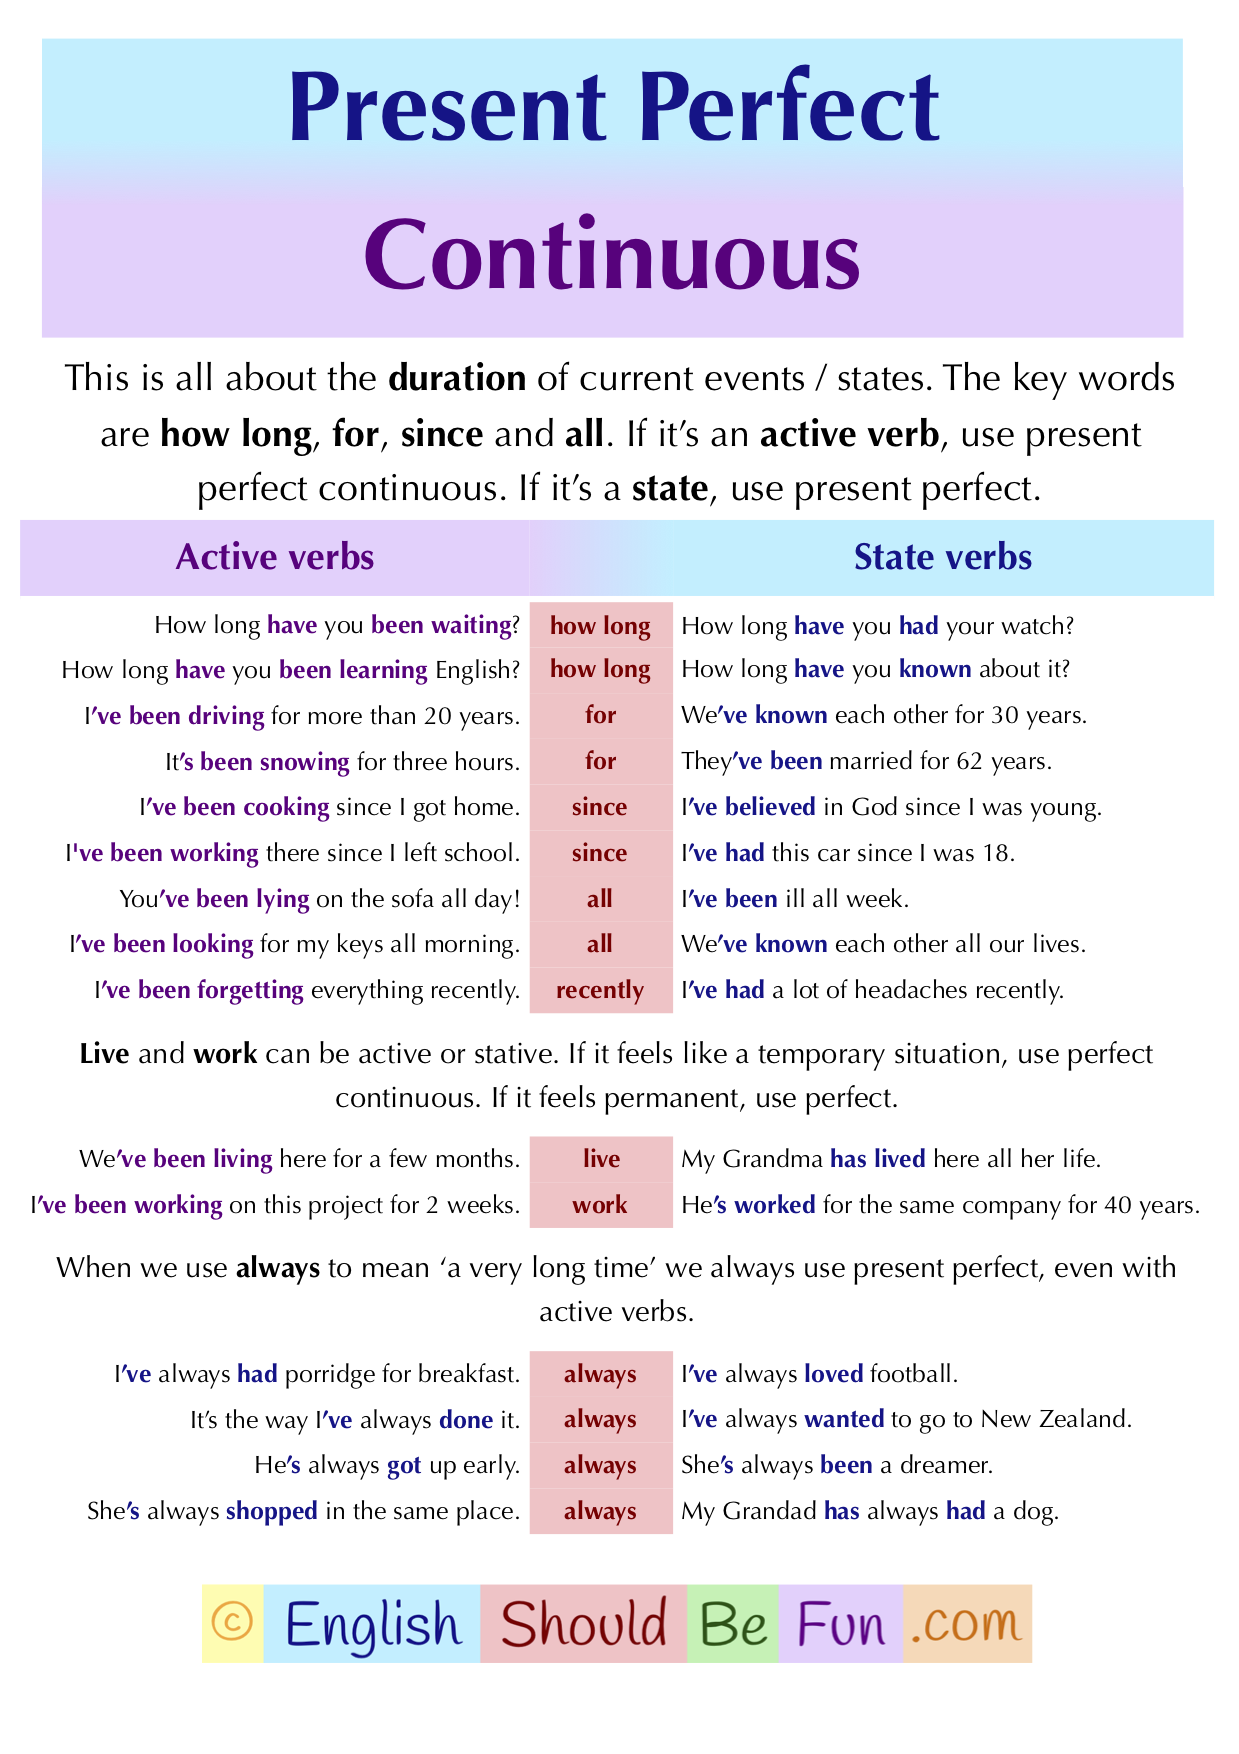 Present Tenses - Perfect Continuous - English Should Be Fun